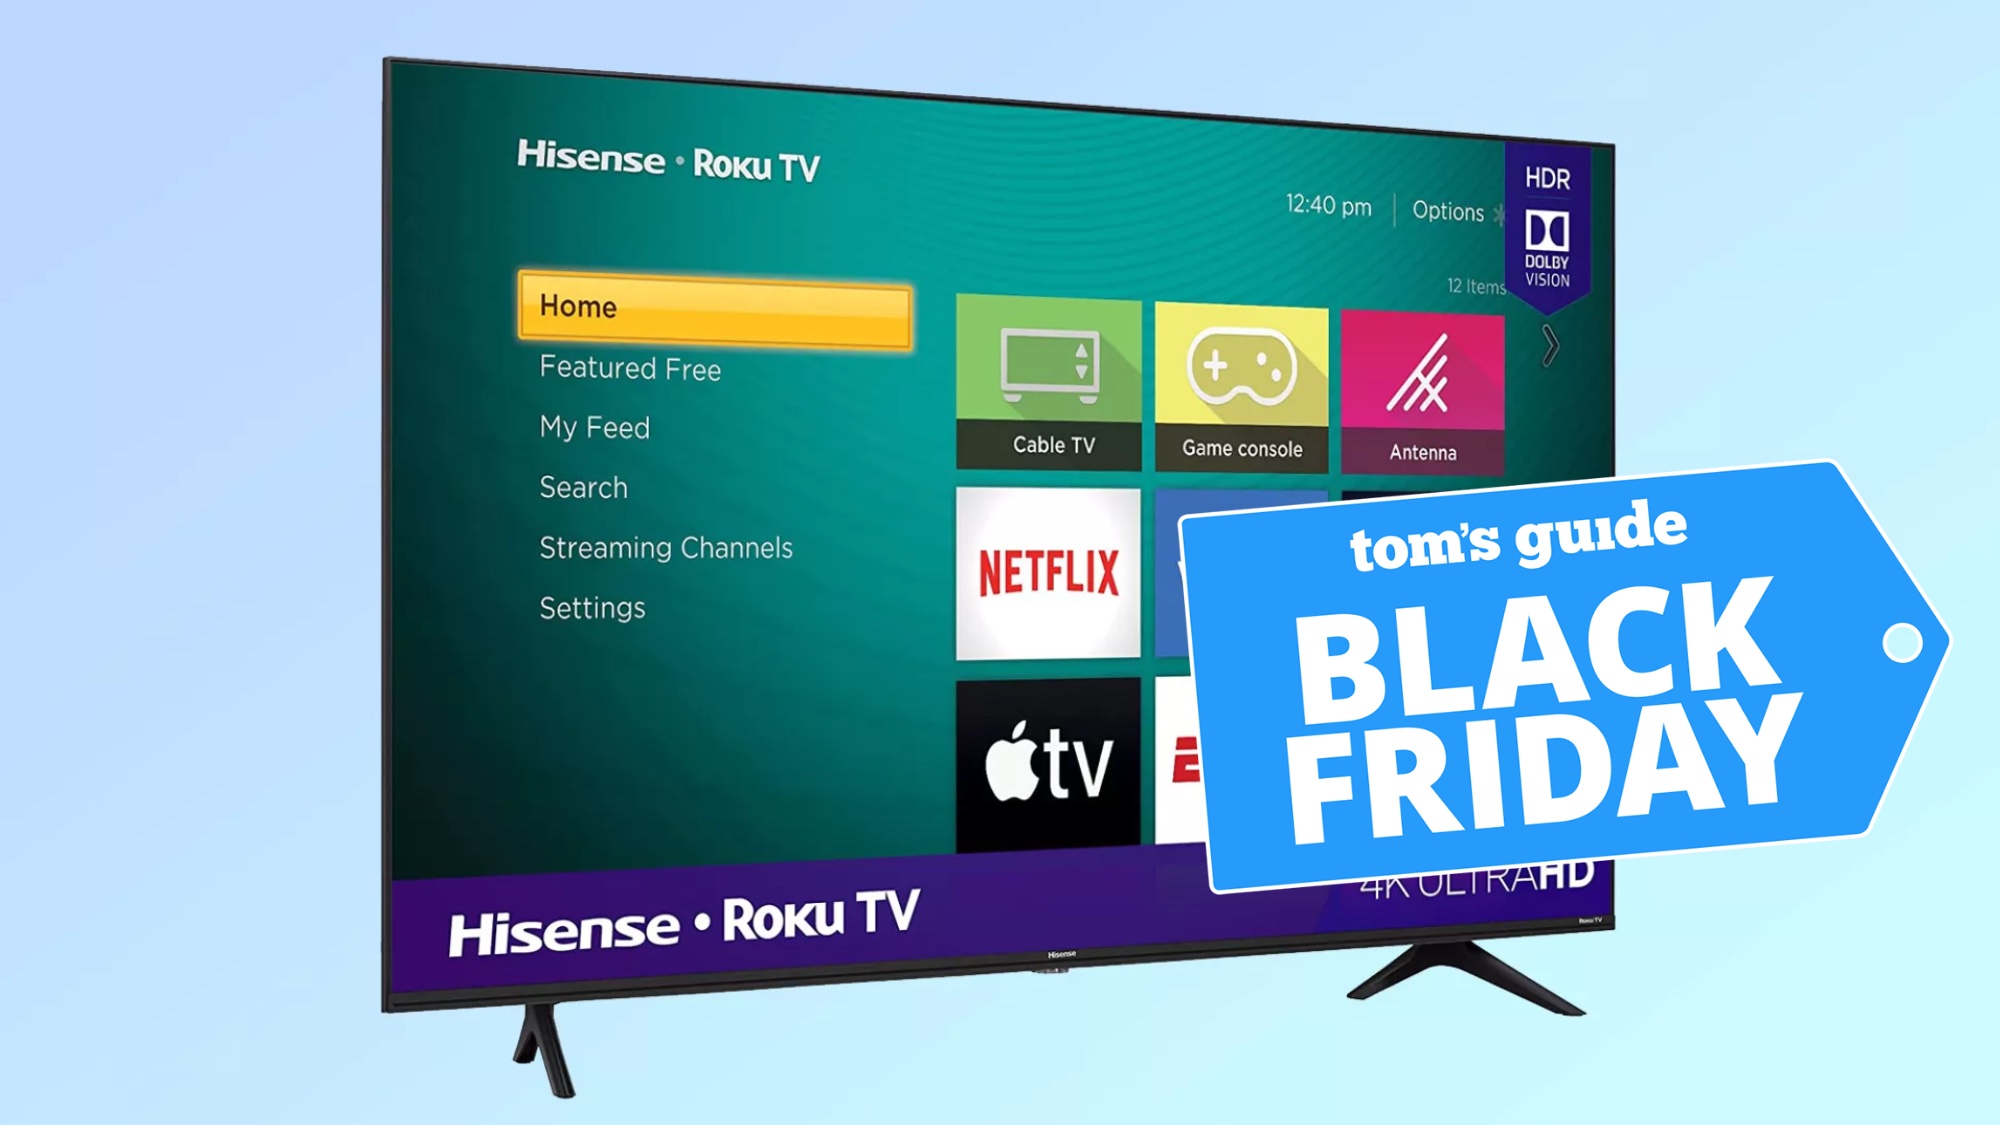 Hisense 4K TV with Tom's Guide contract label